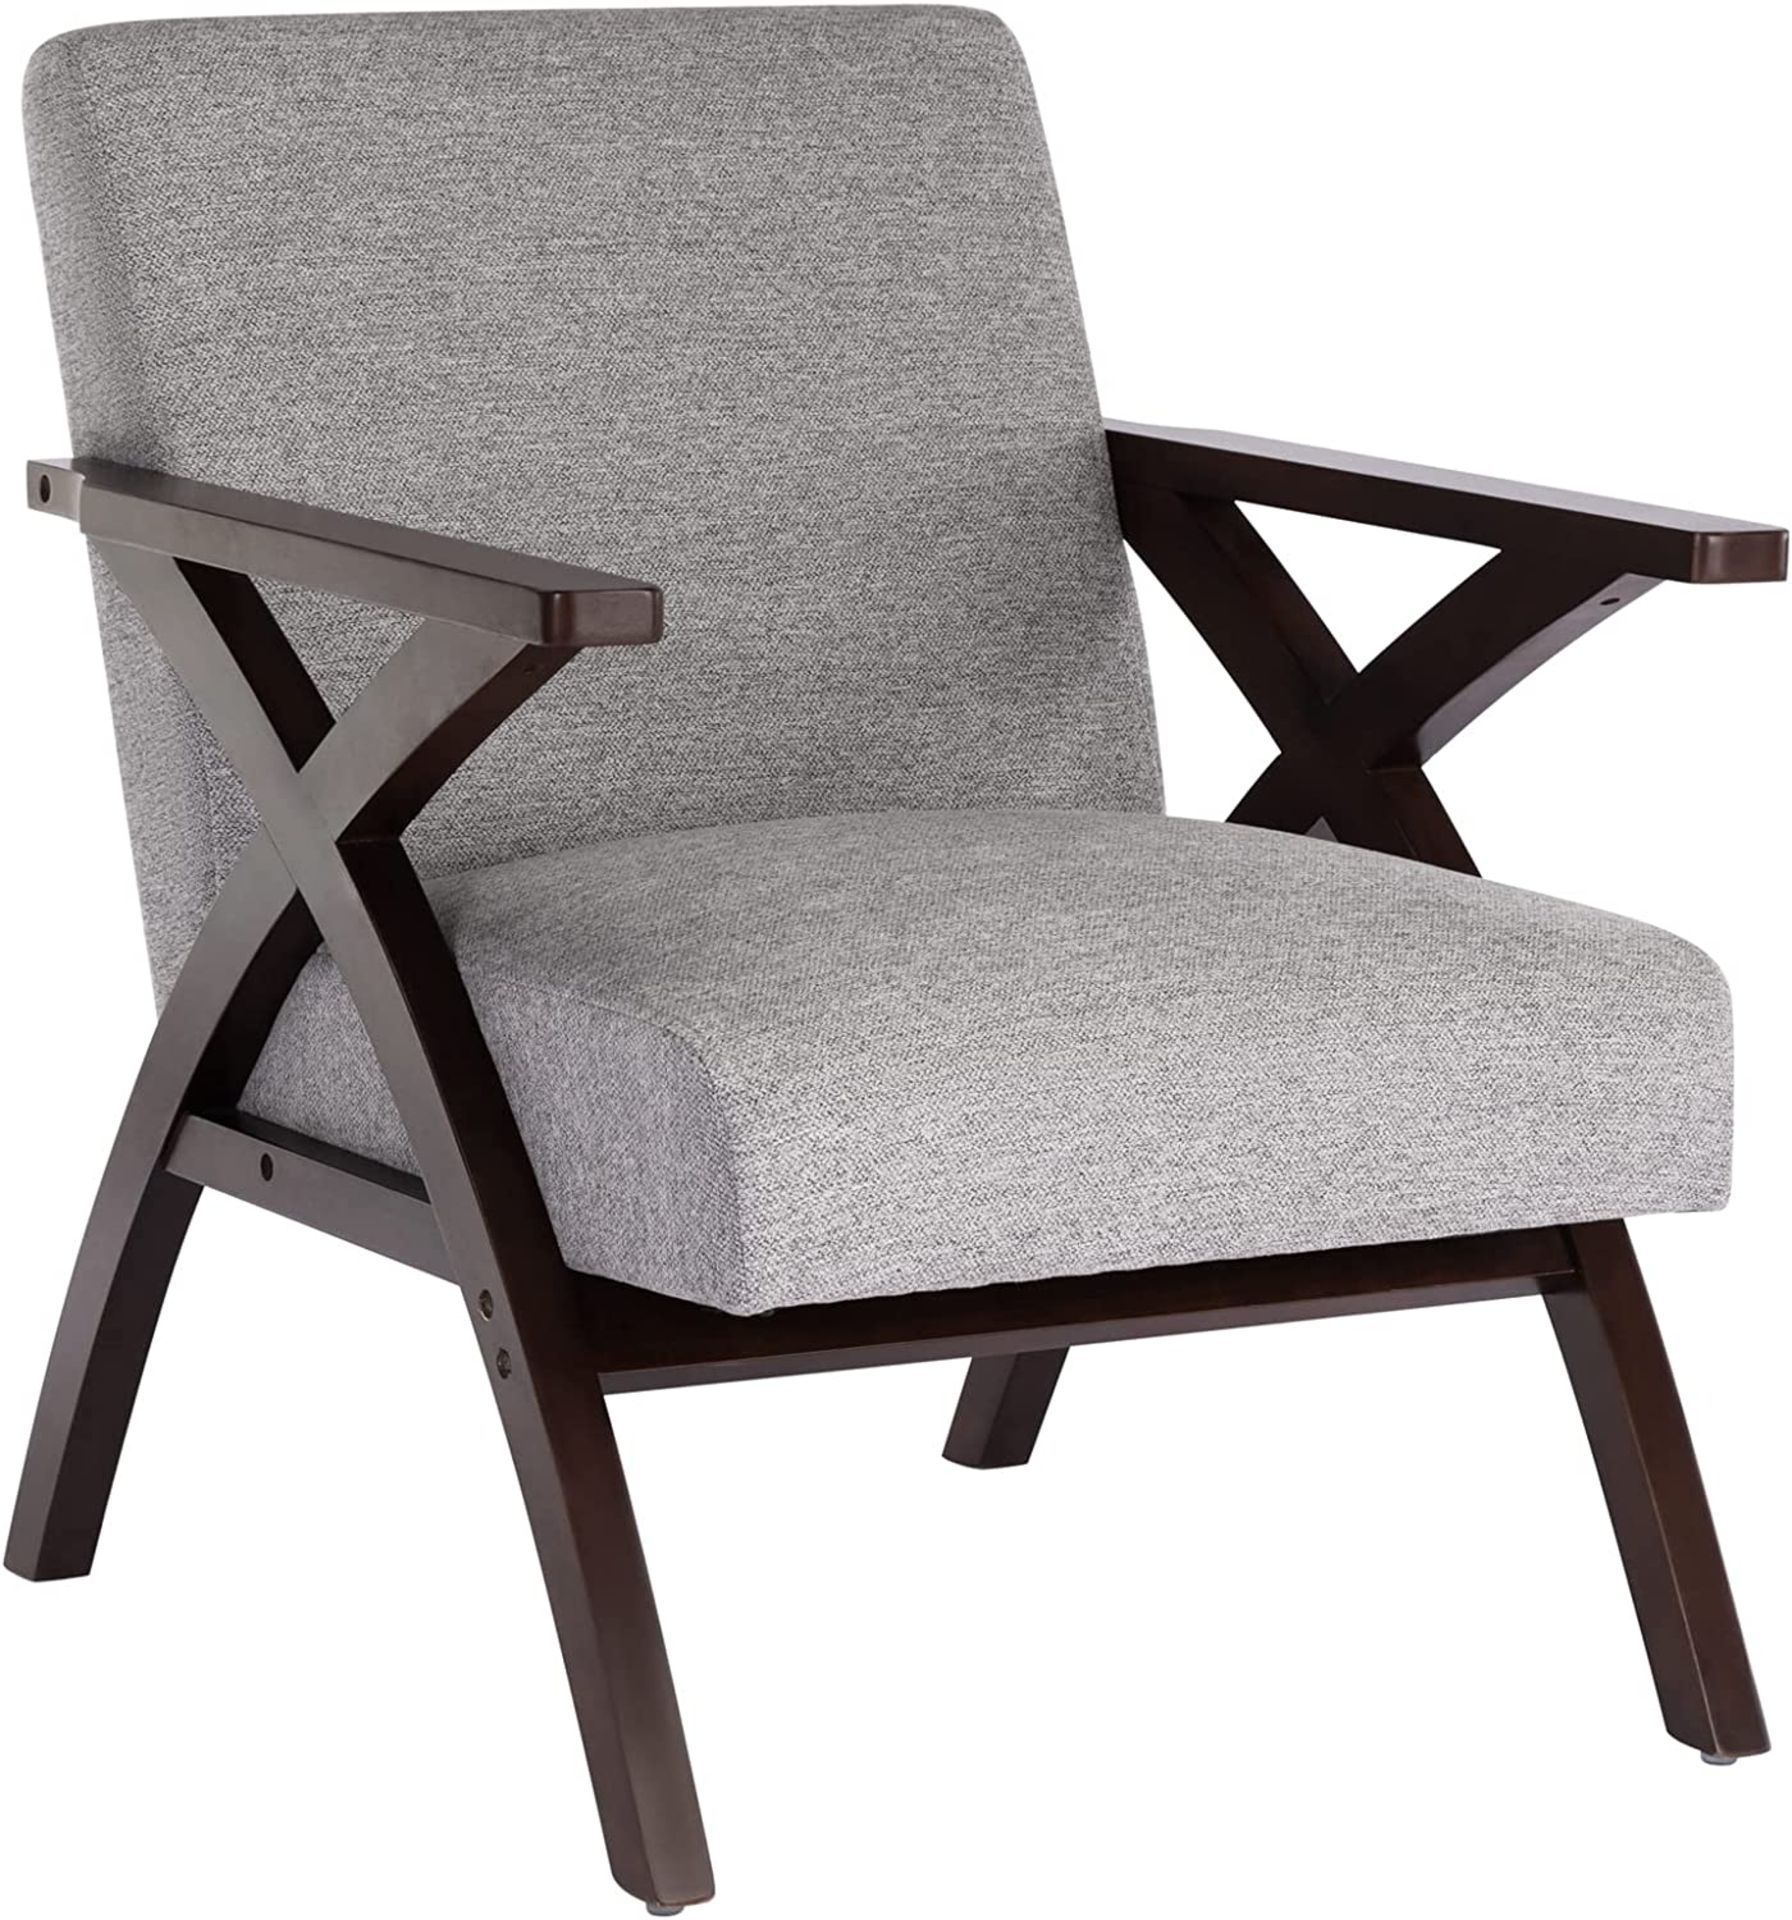 NEW HomeMiYN Mid-Century Wooden Armchair, Upholstered Fabric Elegant X-Frame Accent Chair, Retro